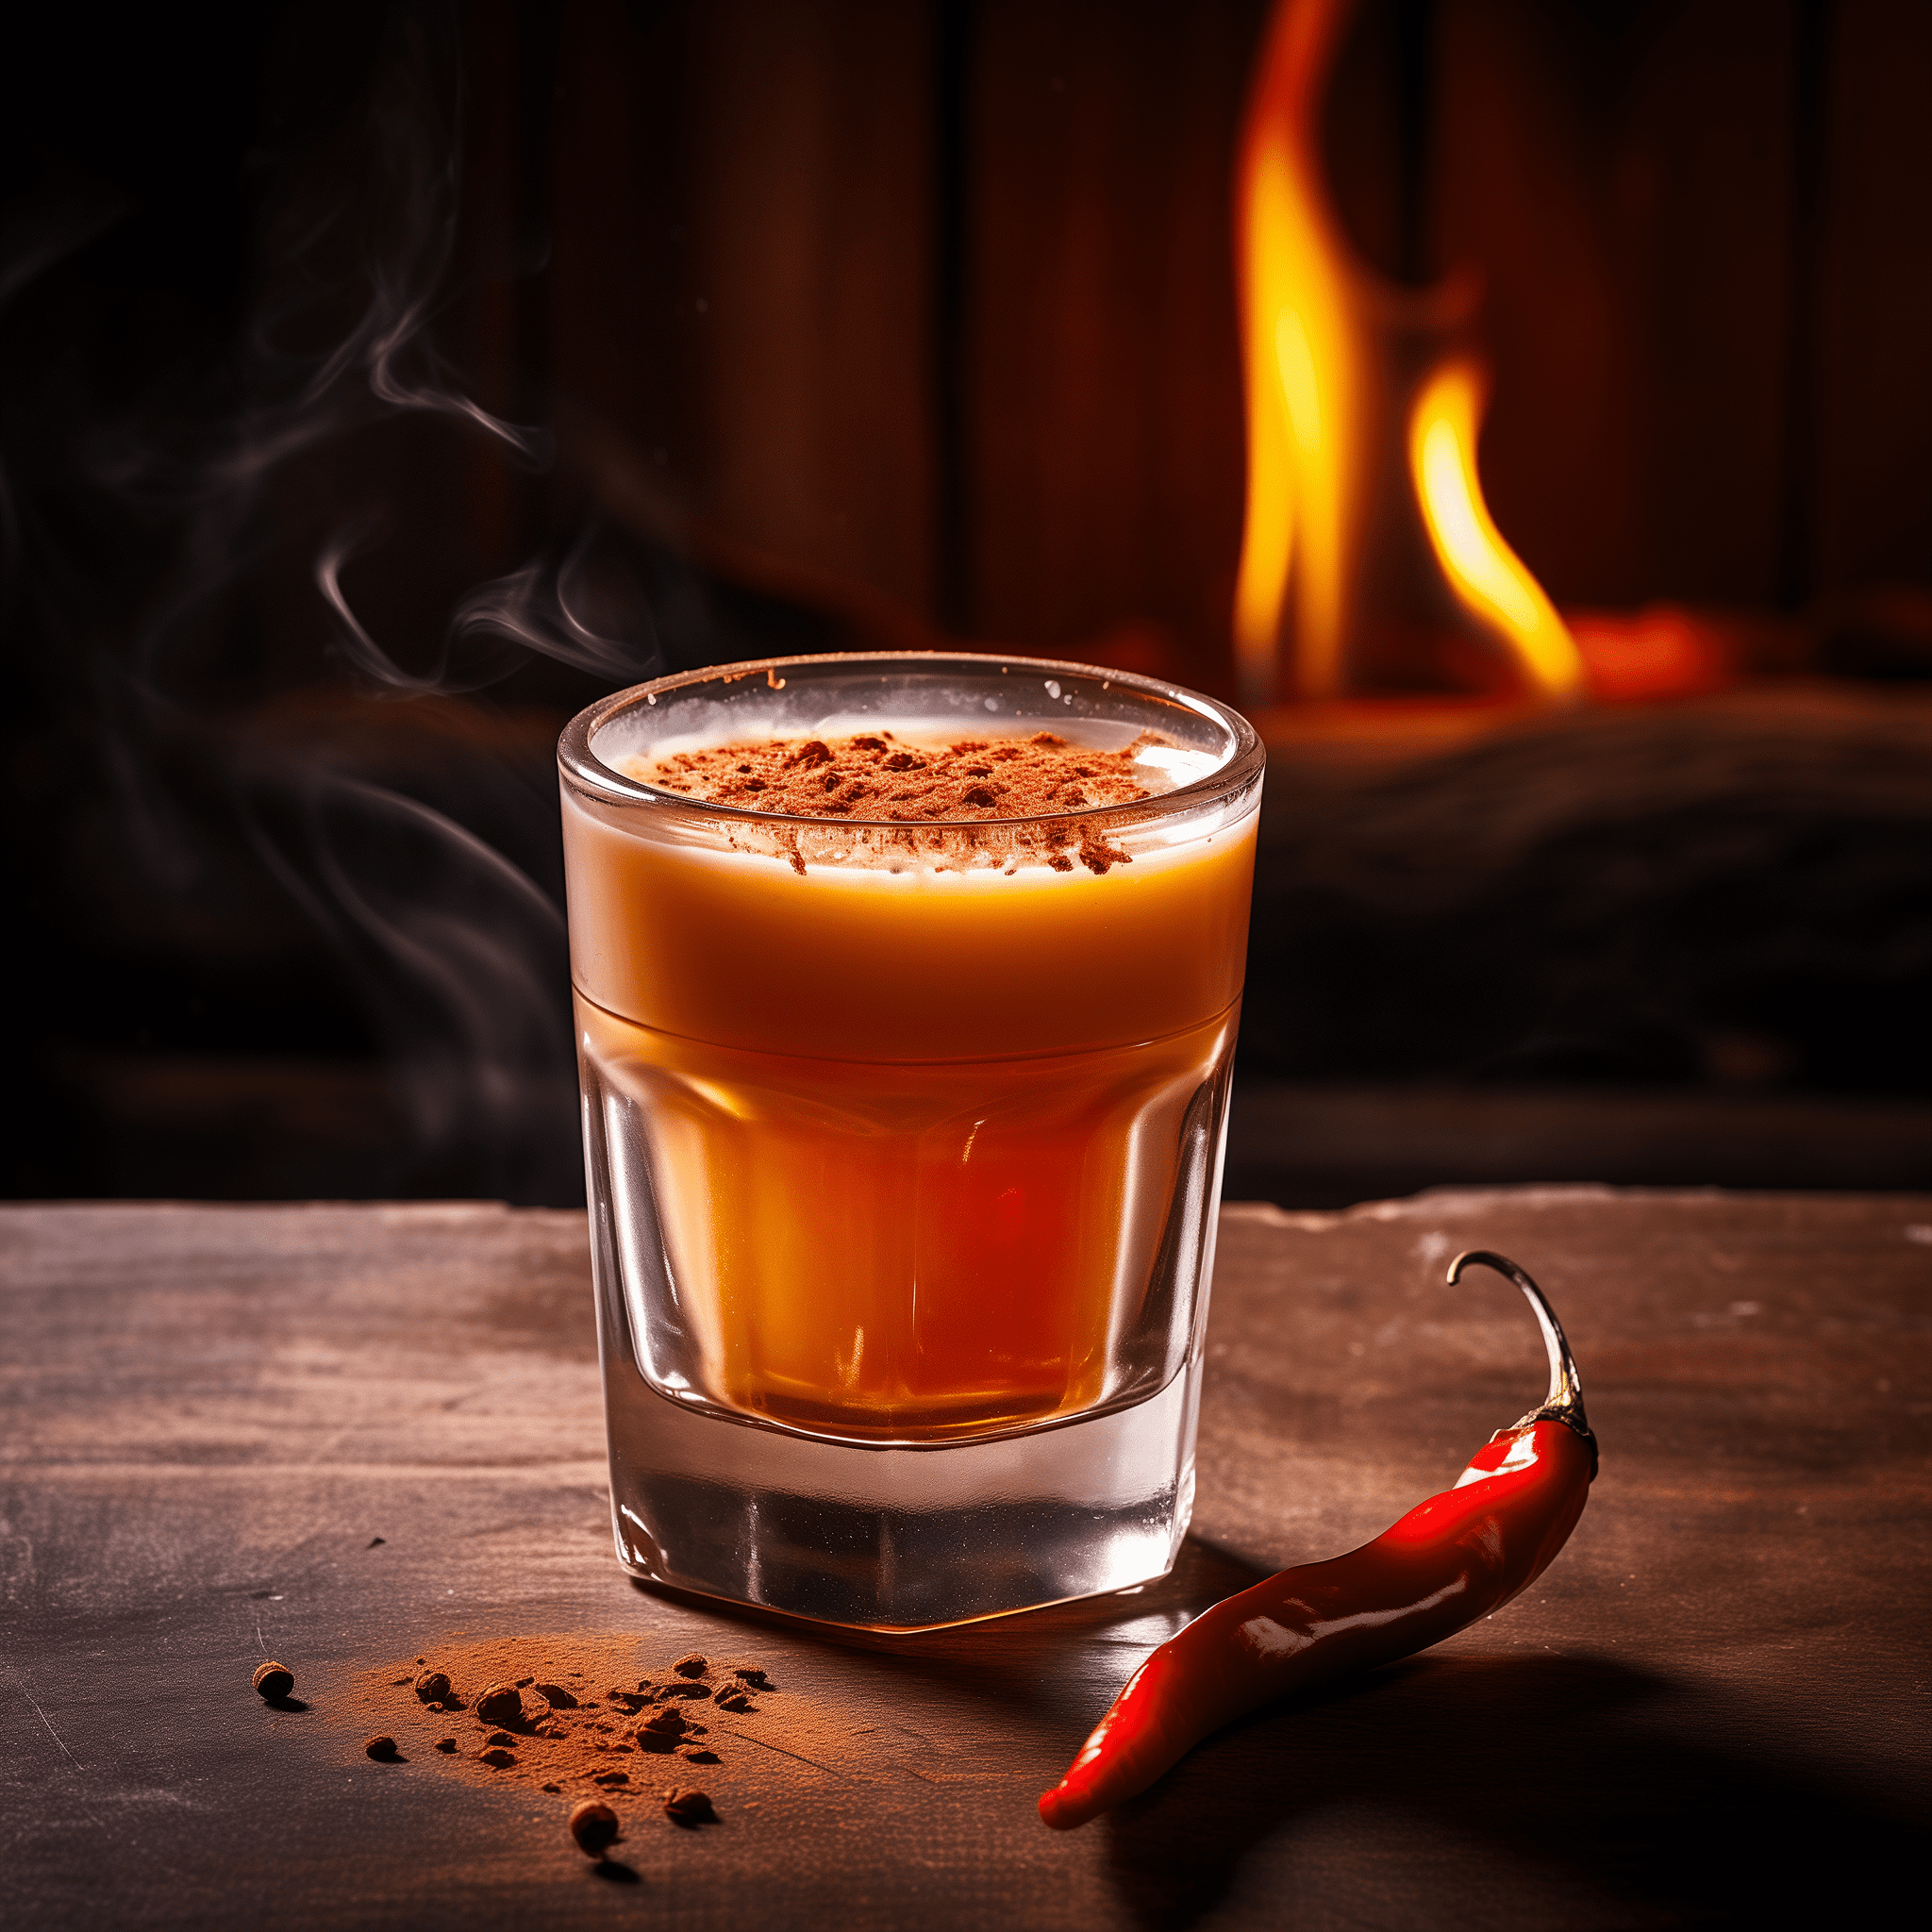 Prairie Dog Recipe - The Prairie Dog shot is fiery and potent. The high-proof rum provides a warm, burning sensation that is immediately followed by the sharp, peppery bite of Tabasco. It's not subtle by any means, and it leaves a lingering heat on the palate.